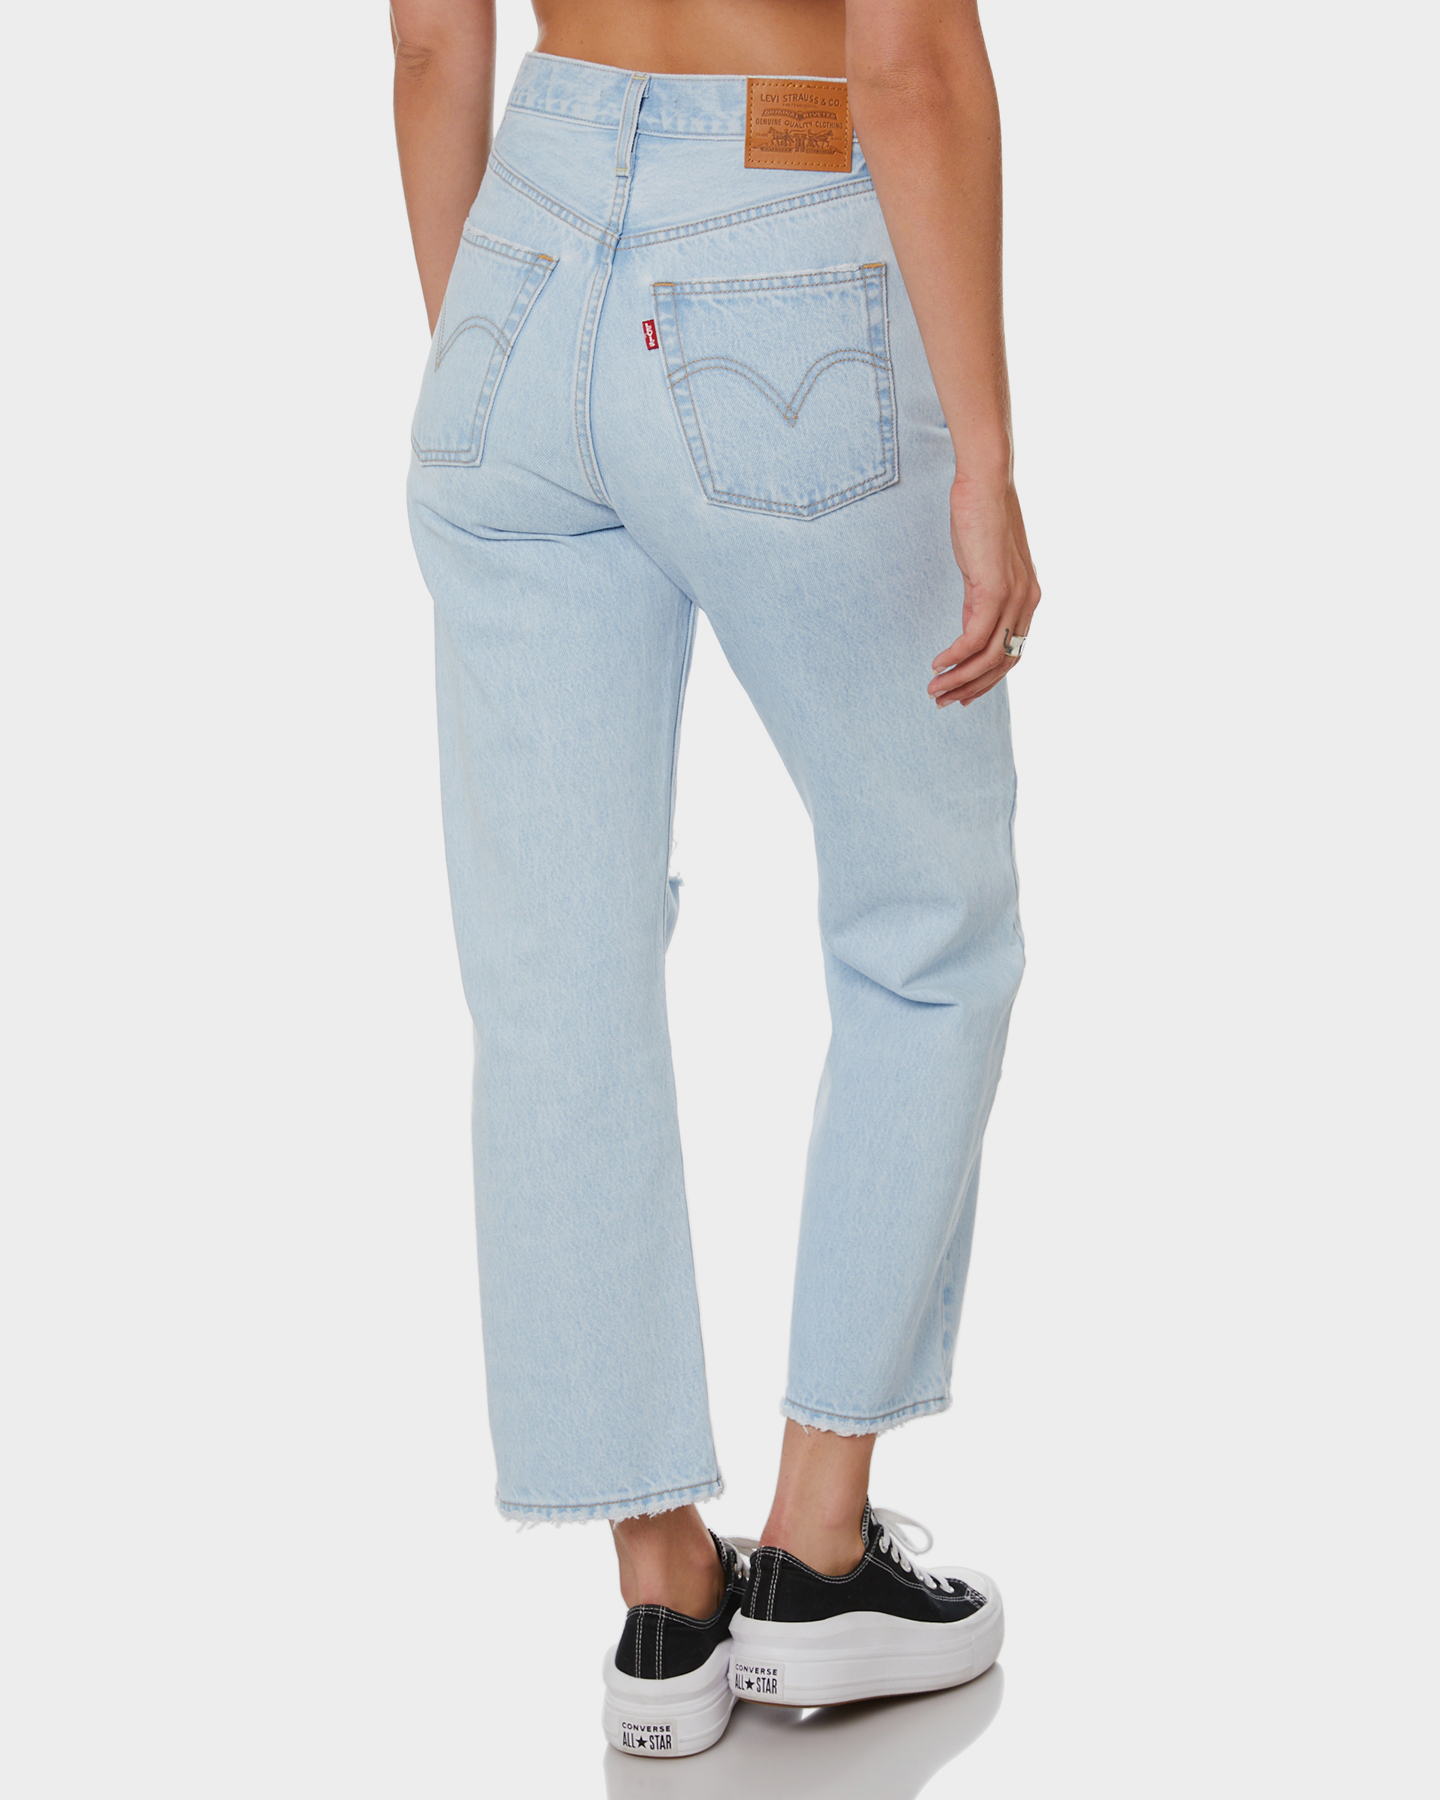 Levi's Ribcage Straight Ankle Jean - Ojai Shore | SurfStitch